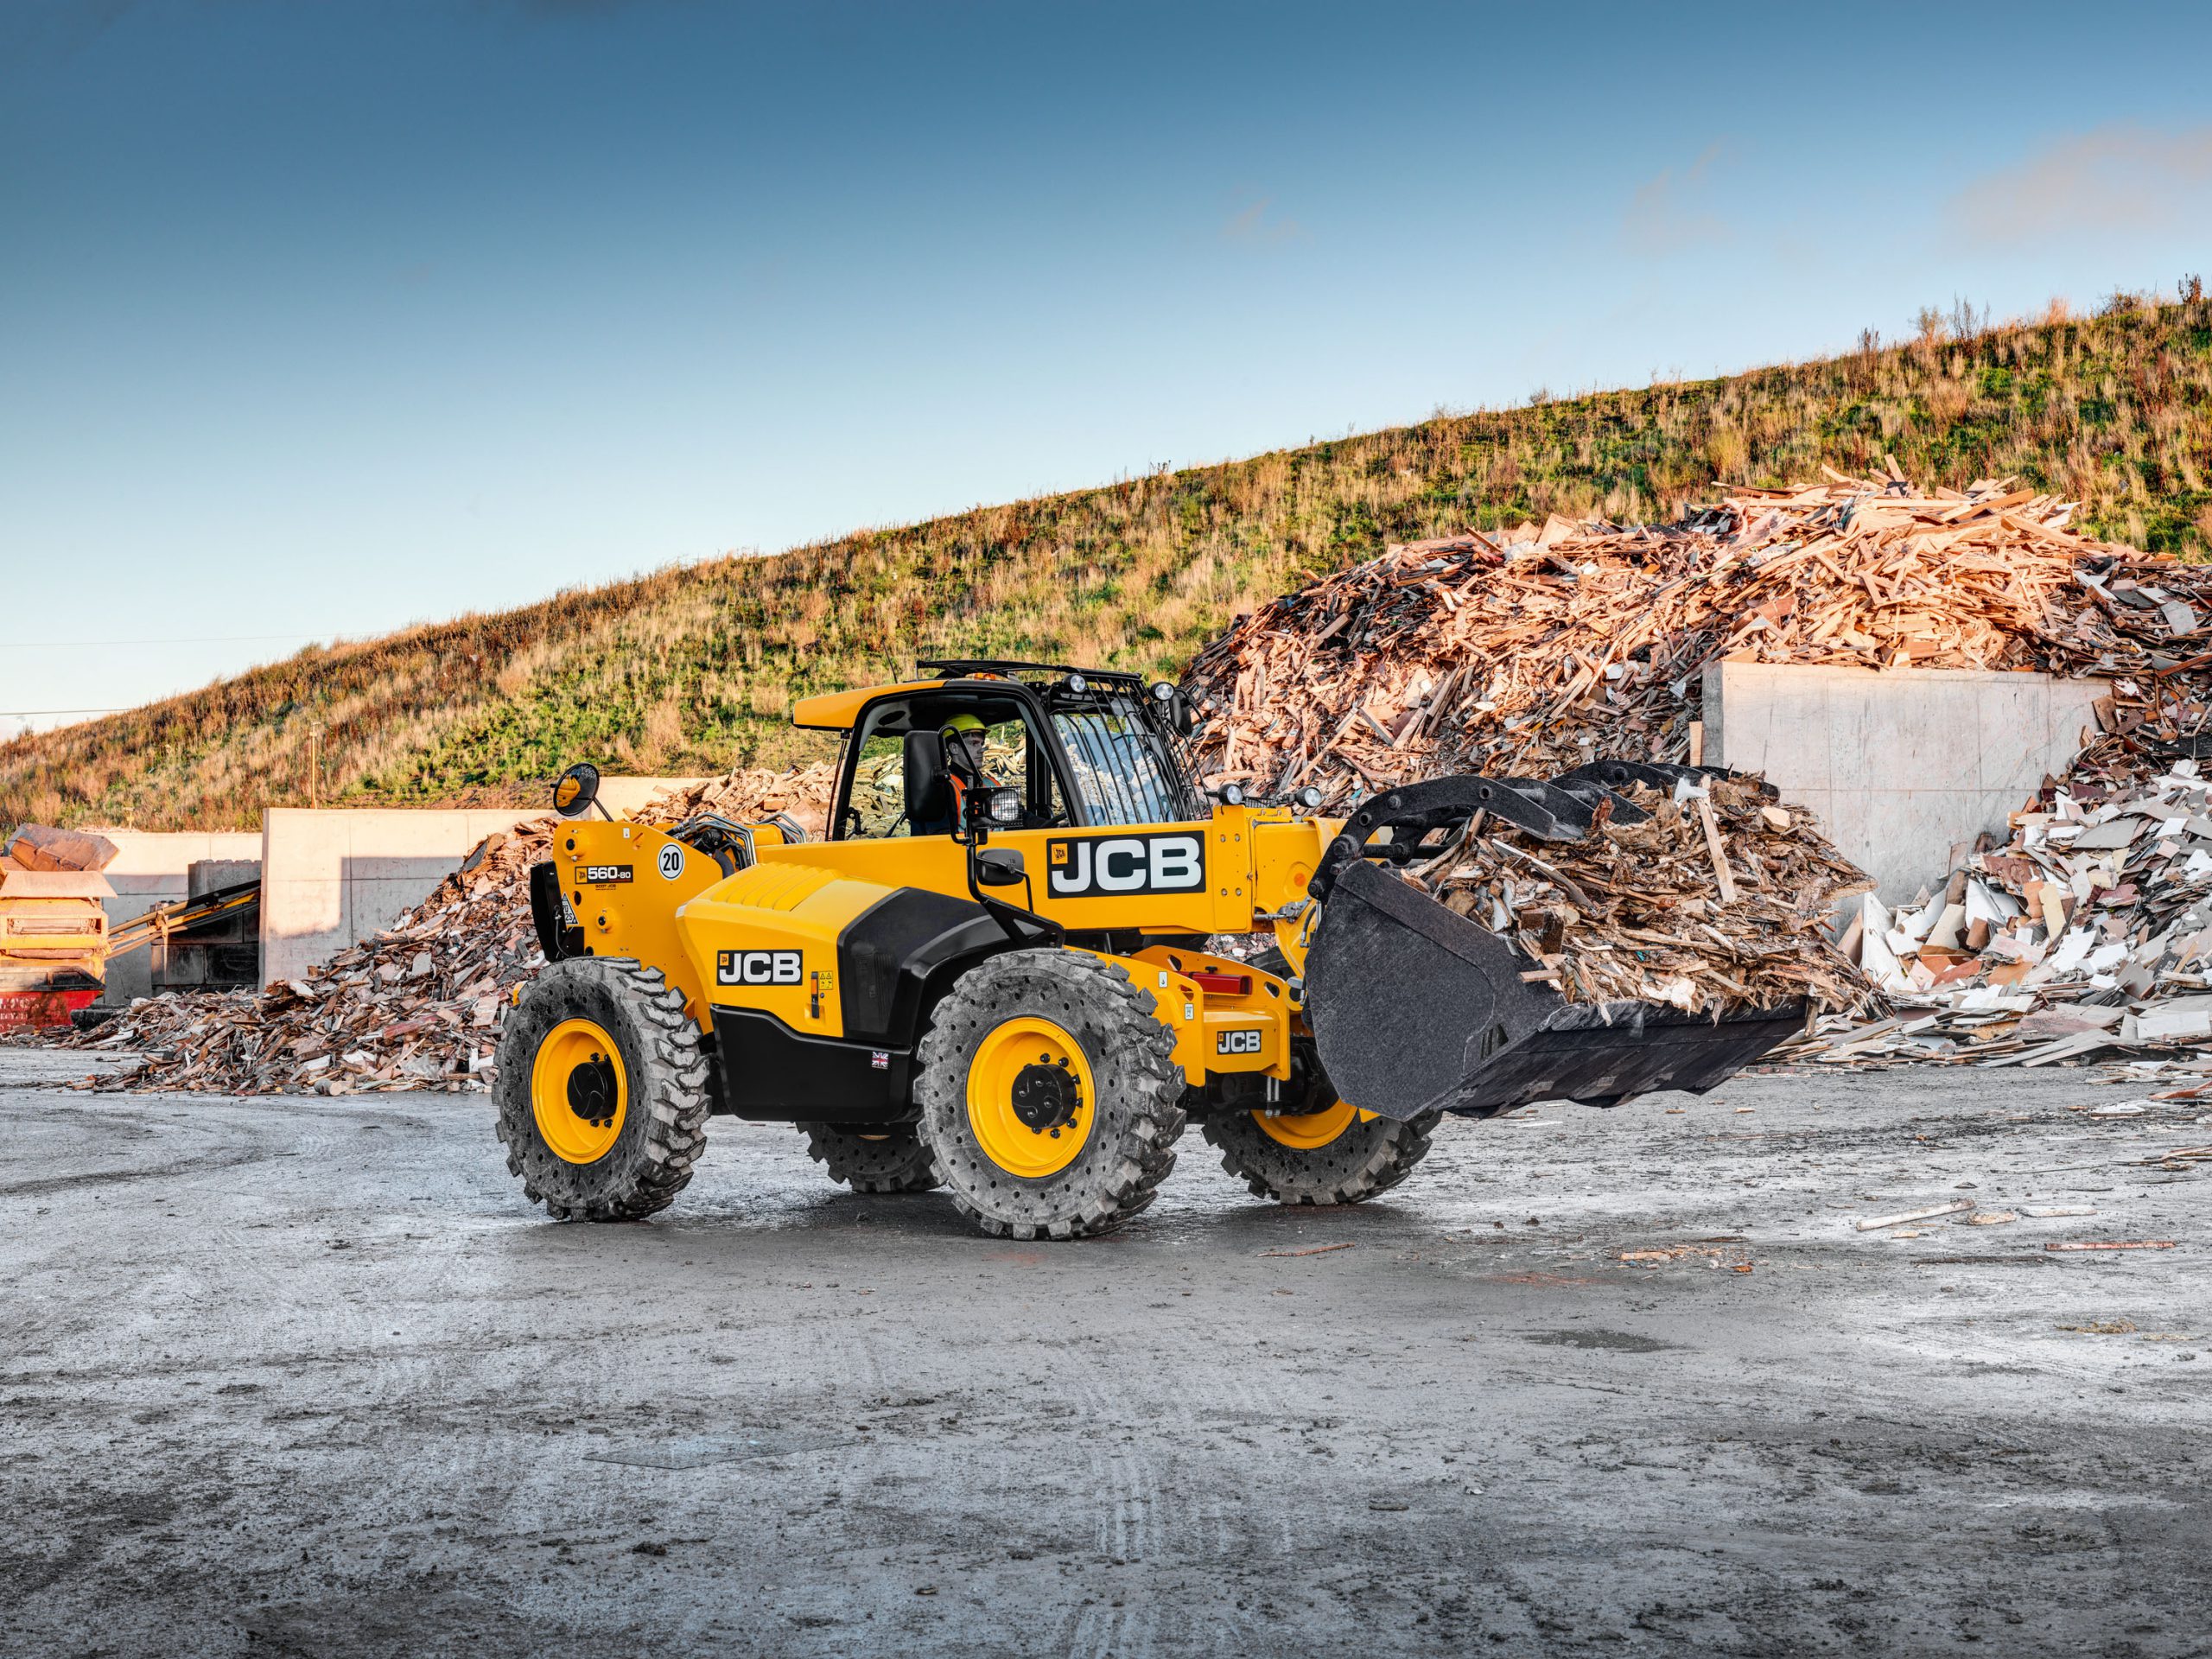 NEW ARRIVALS MEAN THAT TOM WHITE WASTE IS 100 PER CENT JCB